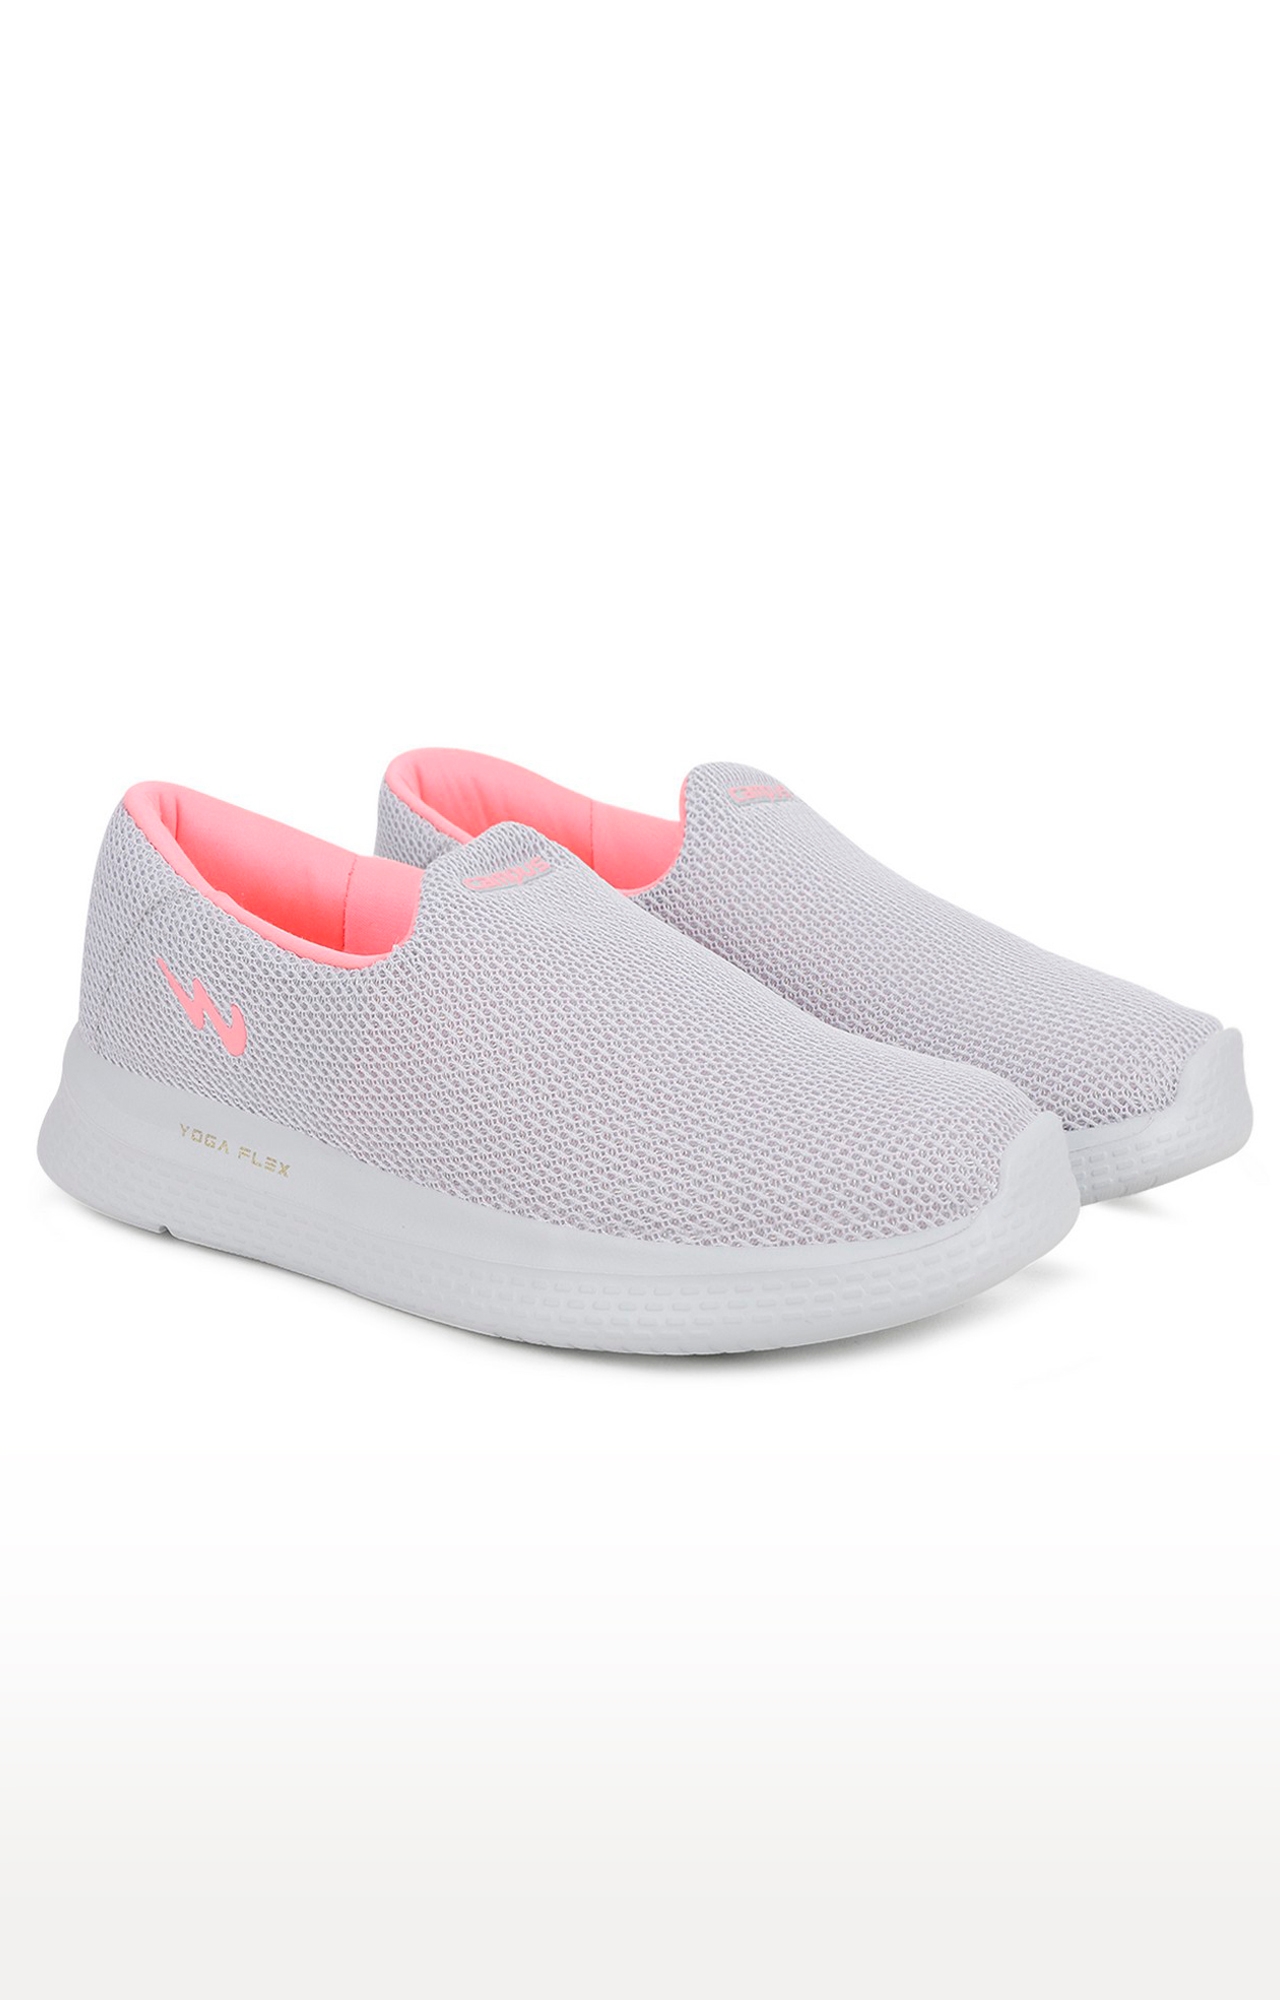 Campus Shoes | Light Grey Zoe Plus Running Shoes